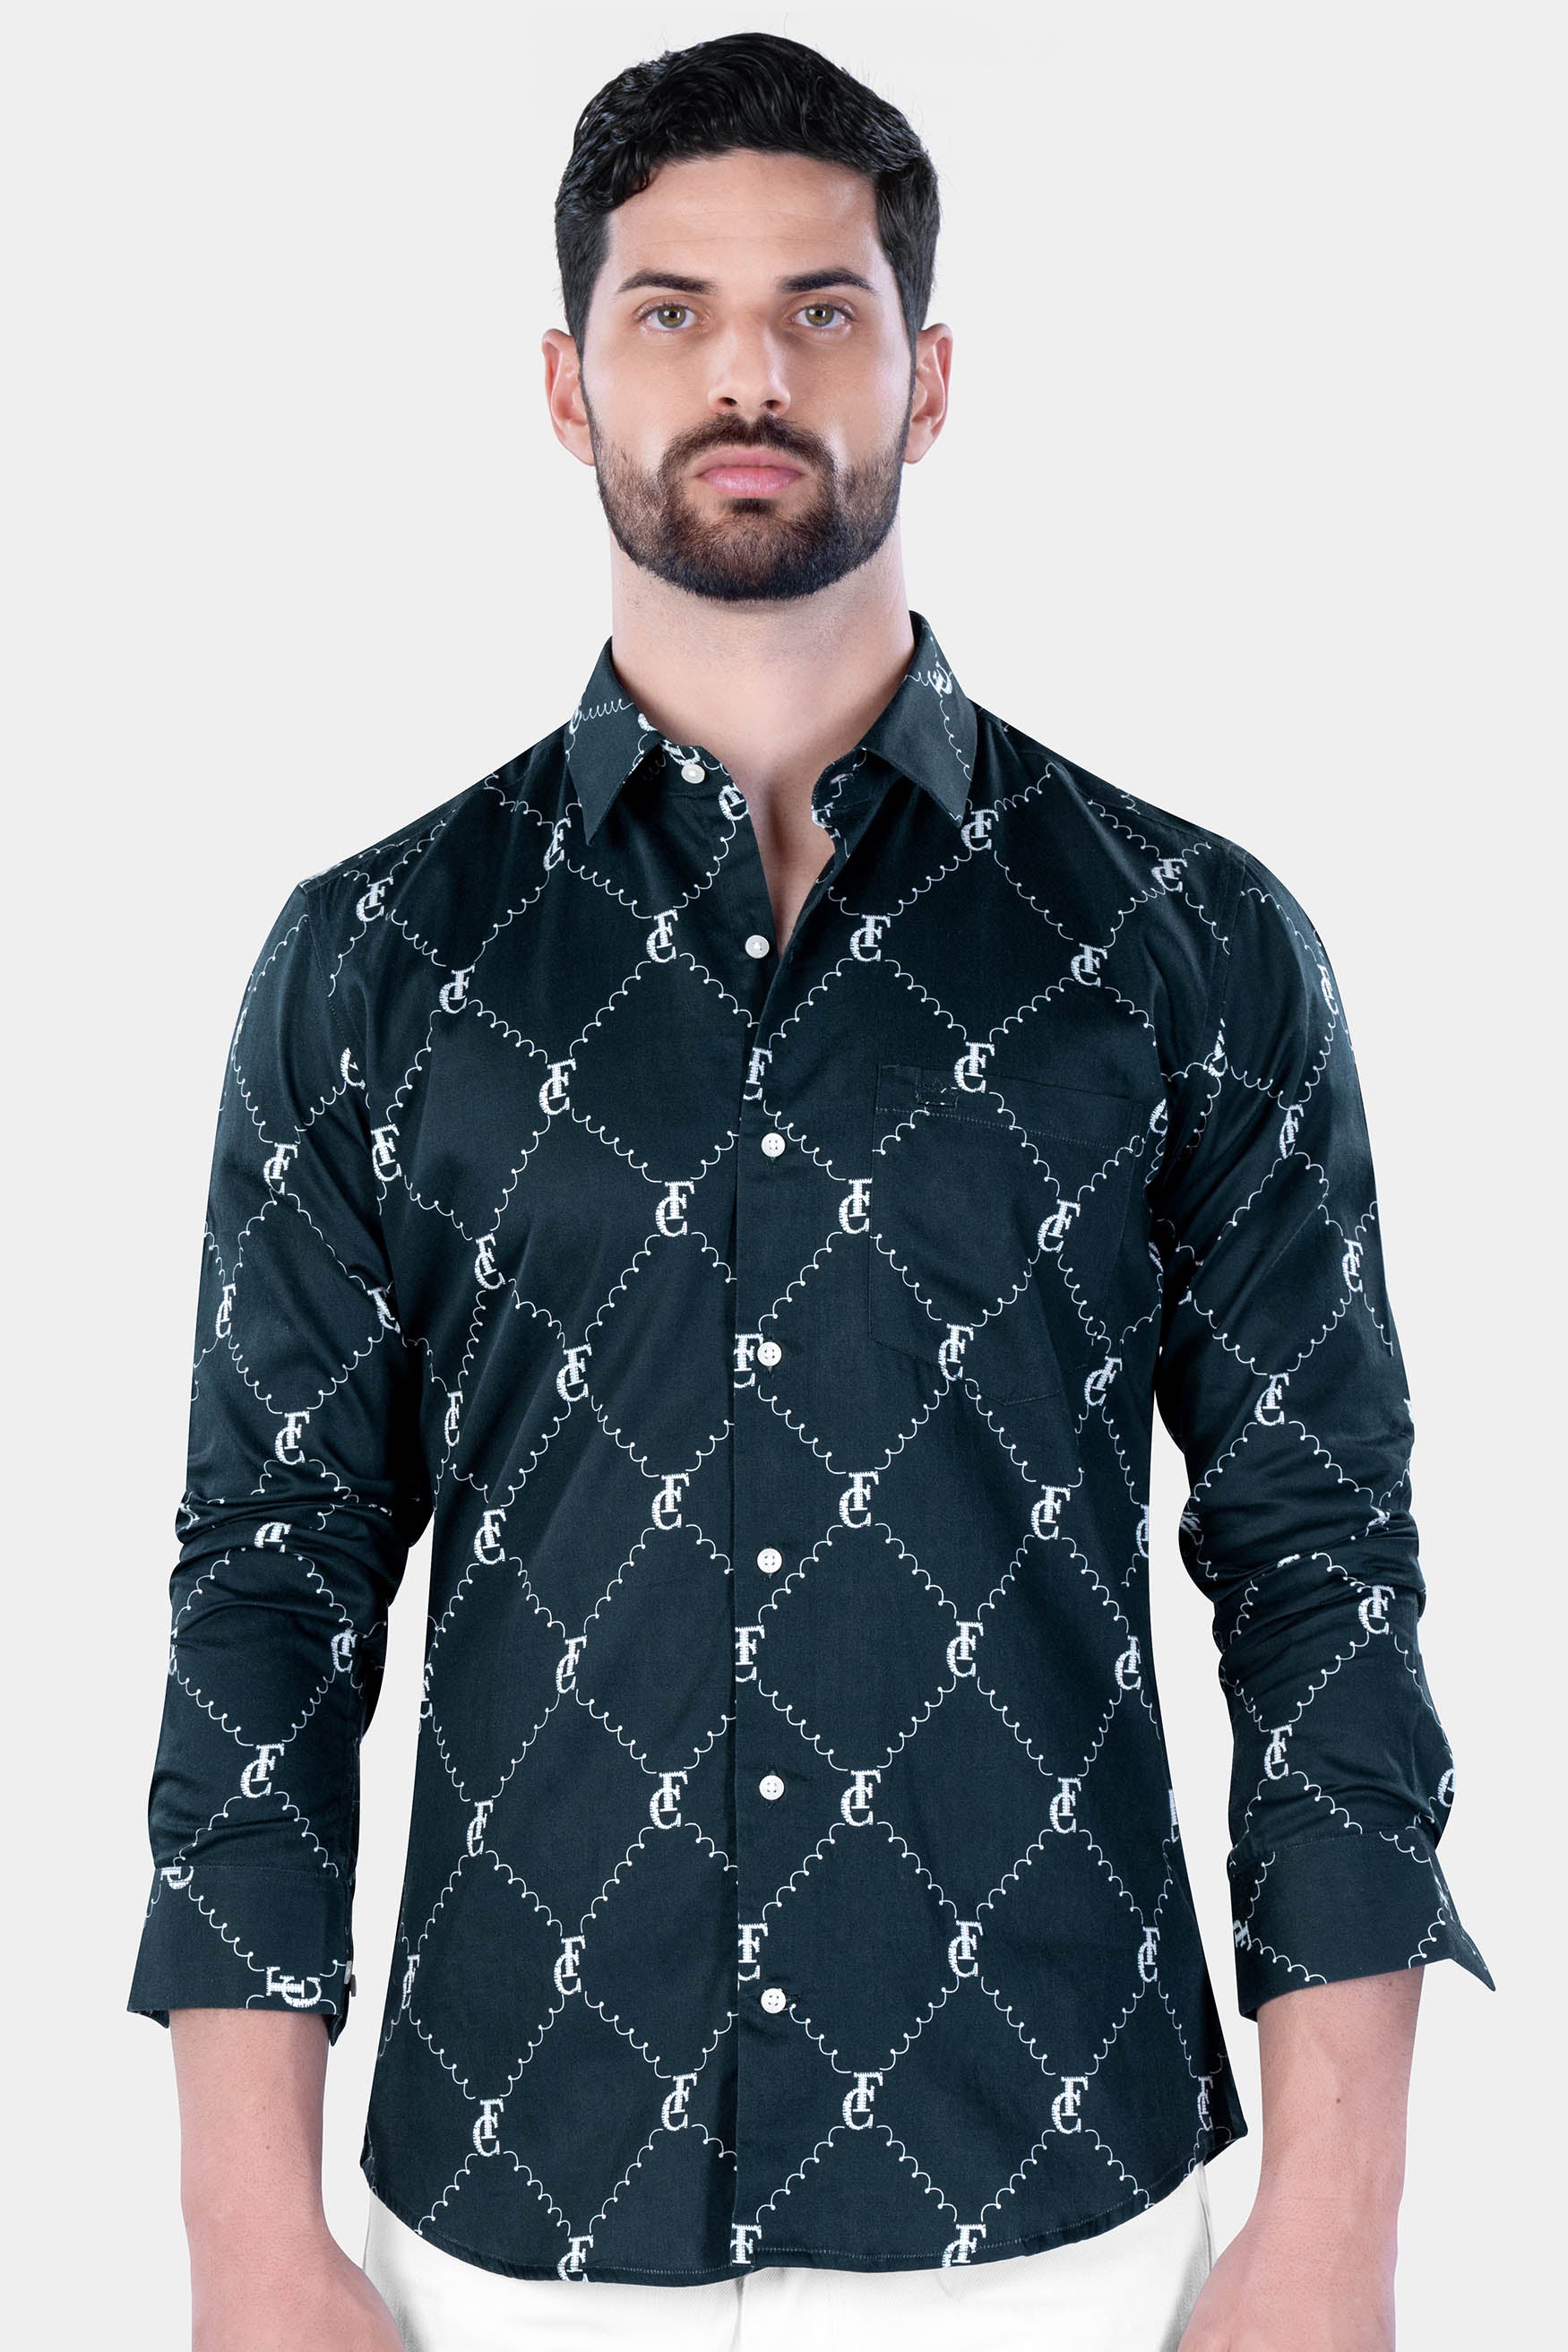  Firefly Blue and White with Brand Elements and Geometric Printed Subtle Sheen Super Soft Premium Cotton Designer Shirt 12100-38, 12100-H-38, 12100-39, 12100-H-39, 12100-40, 12100-H-40, 12100-42, 12100-H-42, 12100-44, 12100-H-44, 12100-46, 12100-H-46, 12100-48, 12100-H-48, 12100-50, 12100-H-50, 12100-52, 12100-H-52